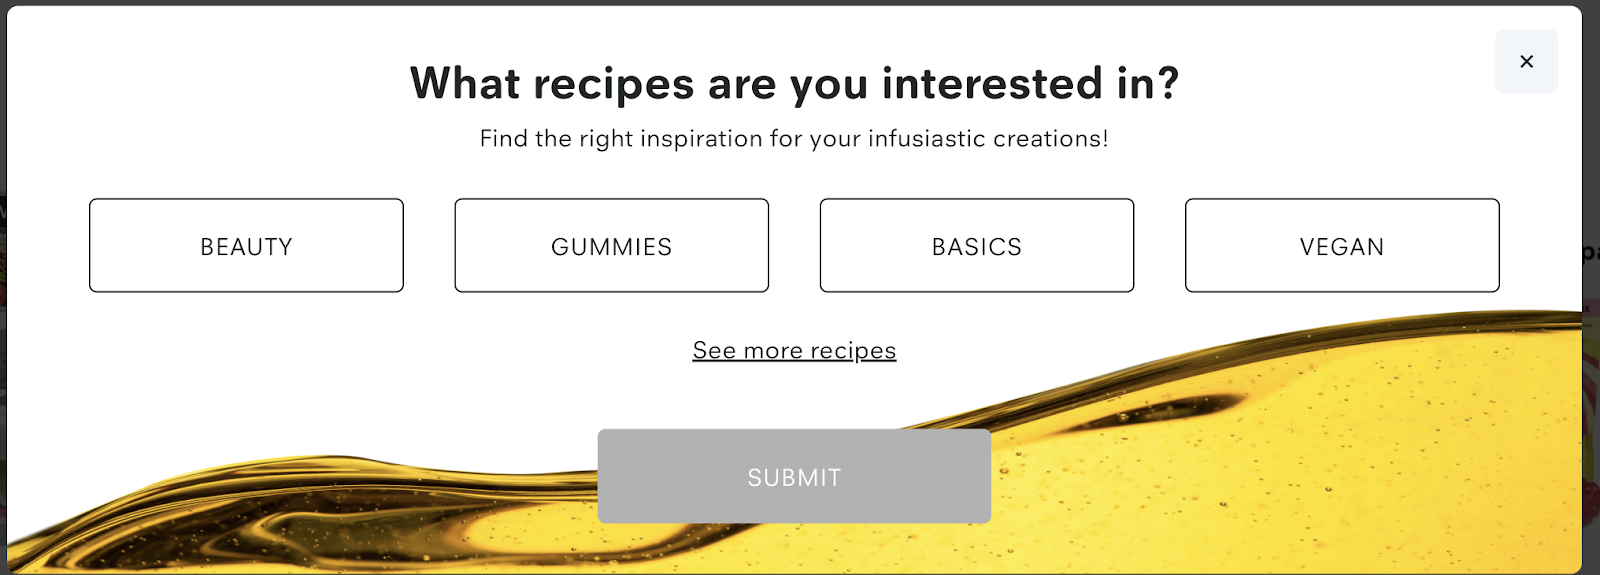 what recipes are you interested in?